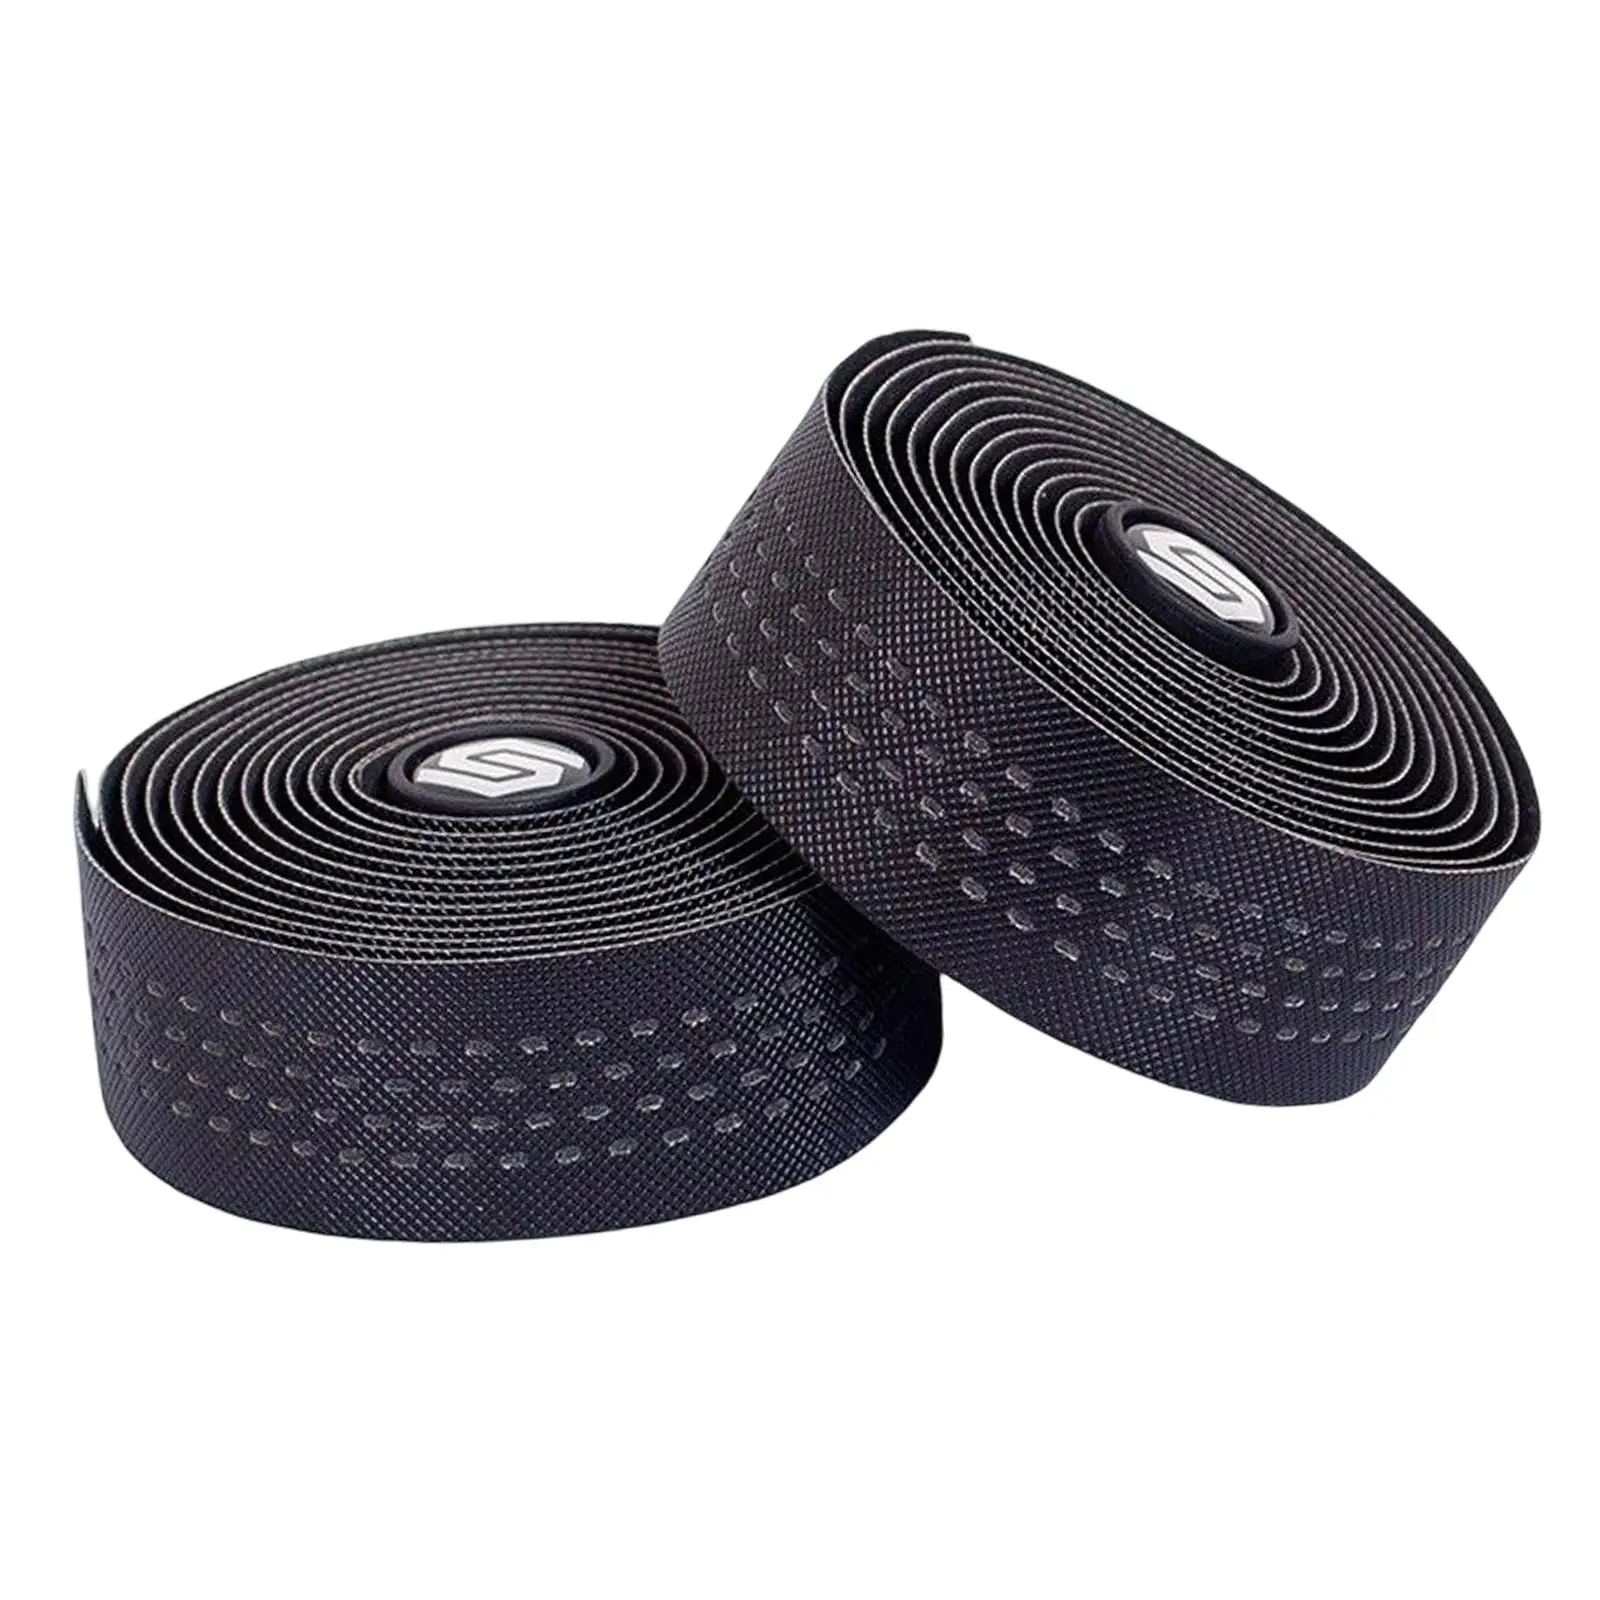 Soft Road Bike Handlebar Tapes with 2 Bar Plug Cycling Handle Wrap Shock Absorption Bike Tape Breathable Damping 2 Rolls